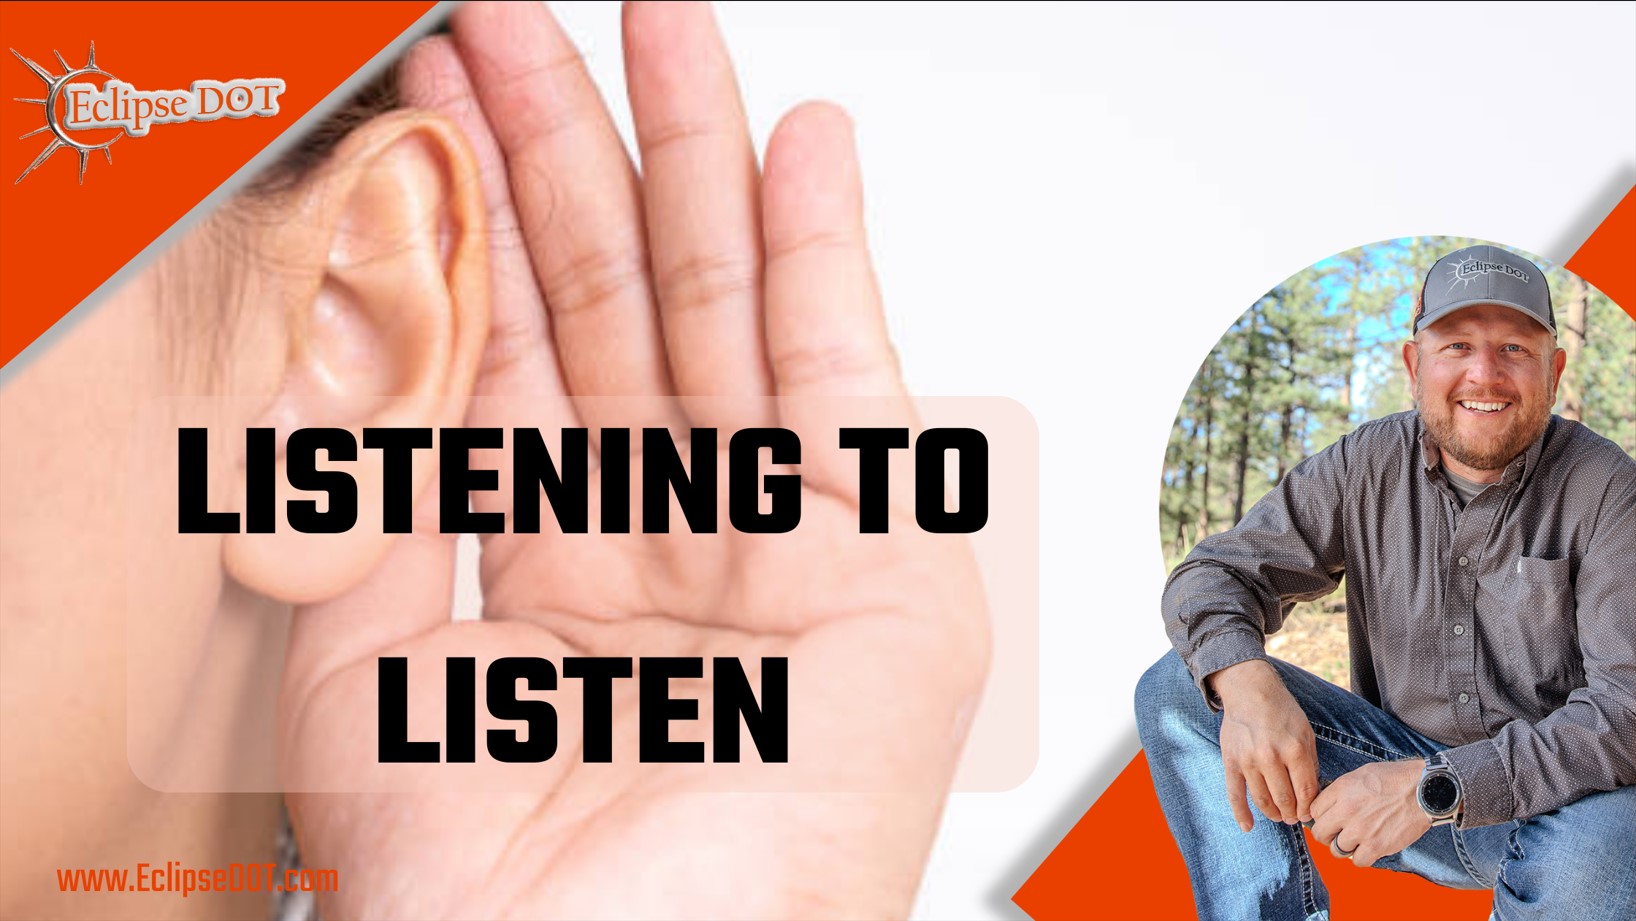 An attentive person actively listens, showcasing the importance of listening skills in communication.